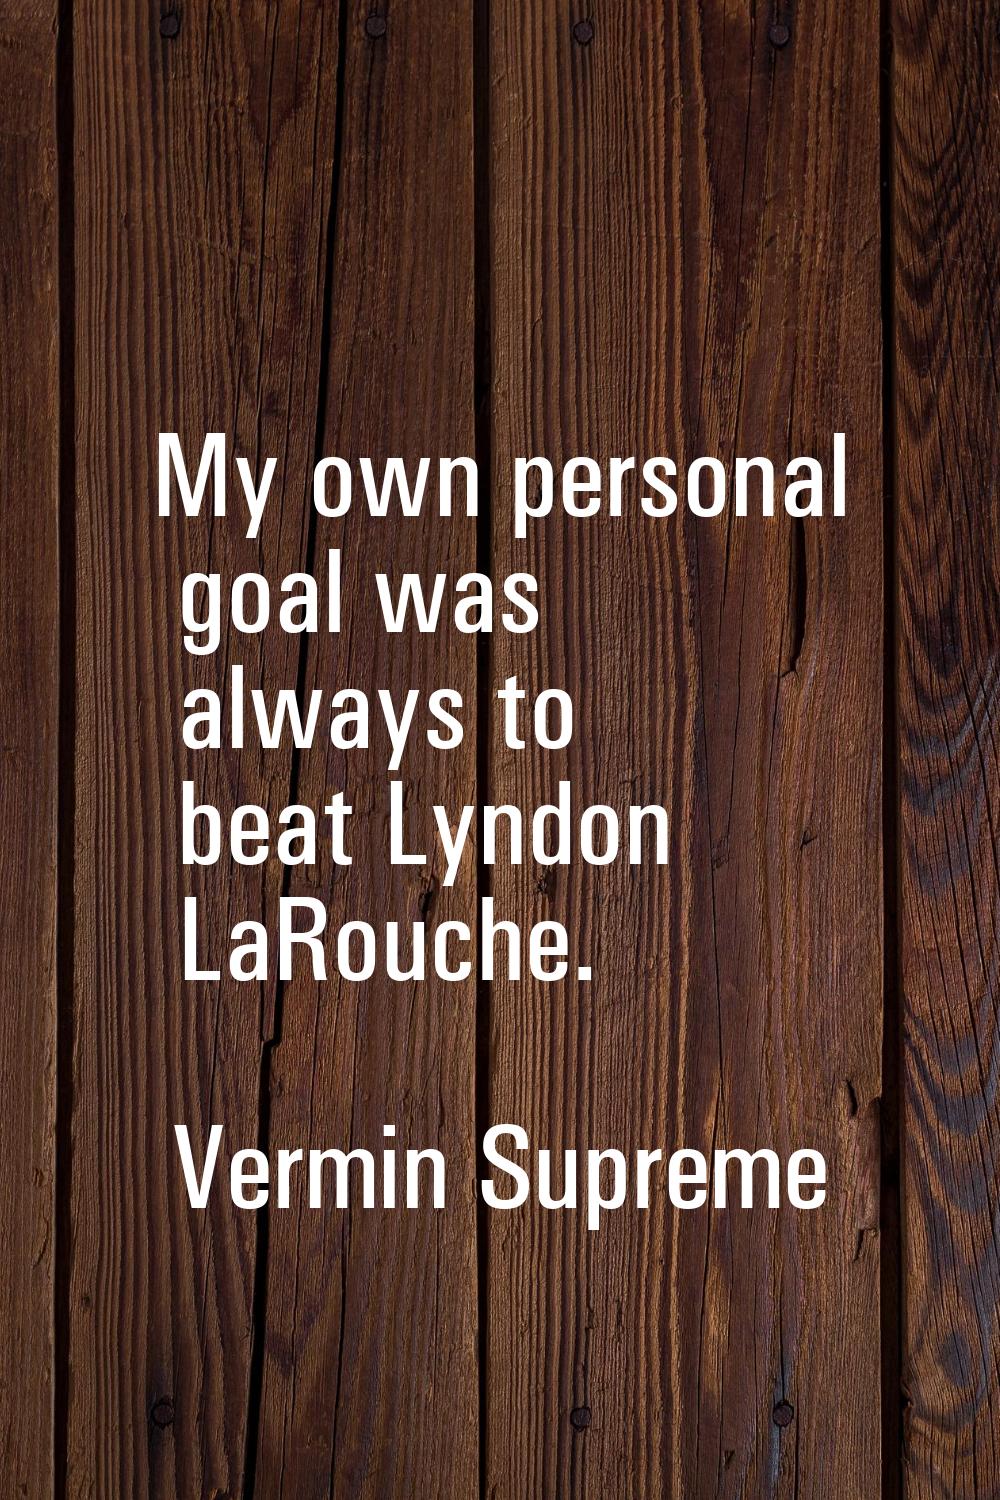 My own personal goal was always to beat Lyndon LaRouche.